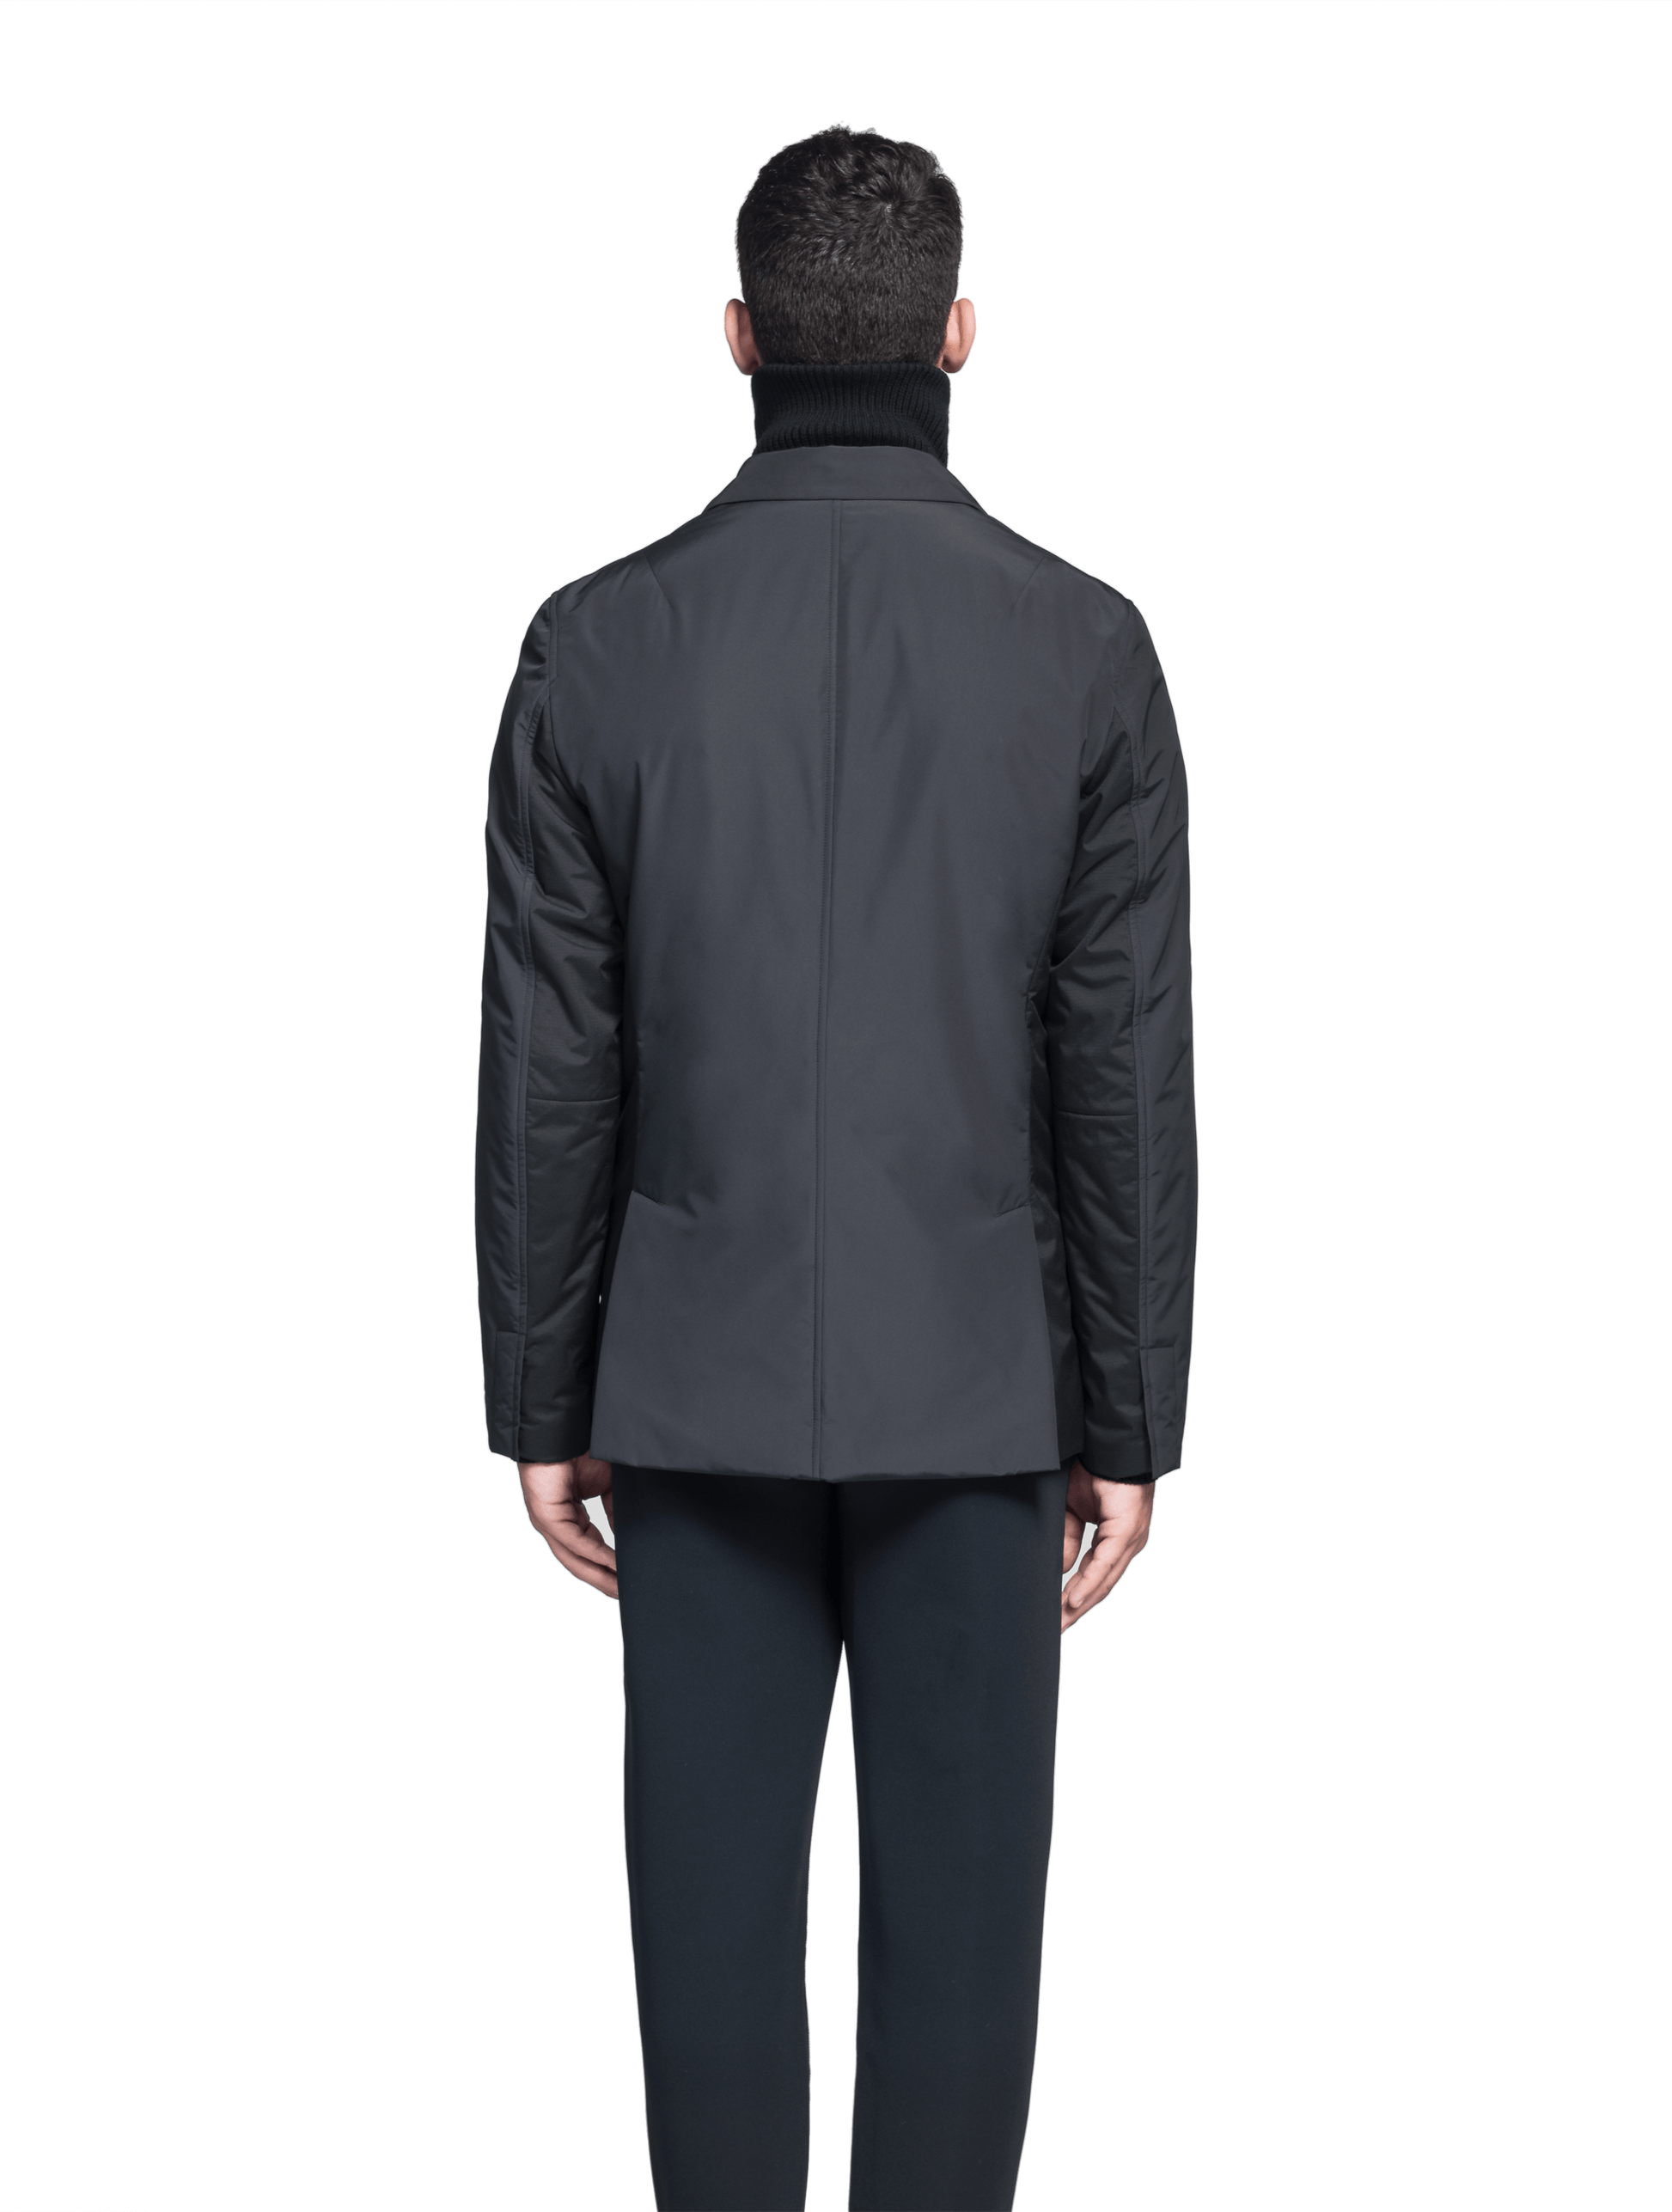 Cody Men's Tailored Travel Blazer in 3-ply micro denier and stretch nylon fabrication with DWR coating, Primaloft Gold Insulation Active+, hidden two-way zipper at centre front with snap closure placket, three invisible exterior zipper pockets, double back pleats, and hidden snap placket at cuffs, in Black